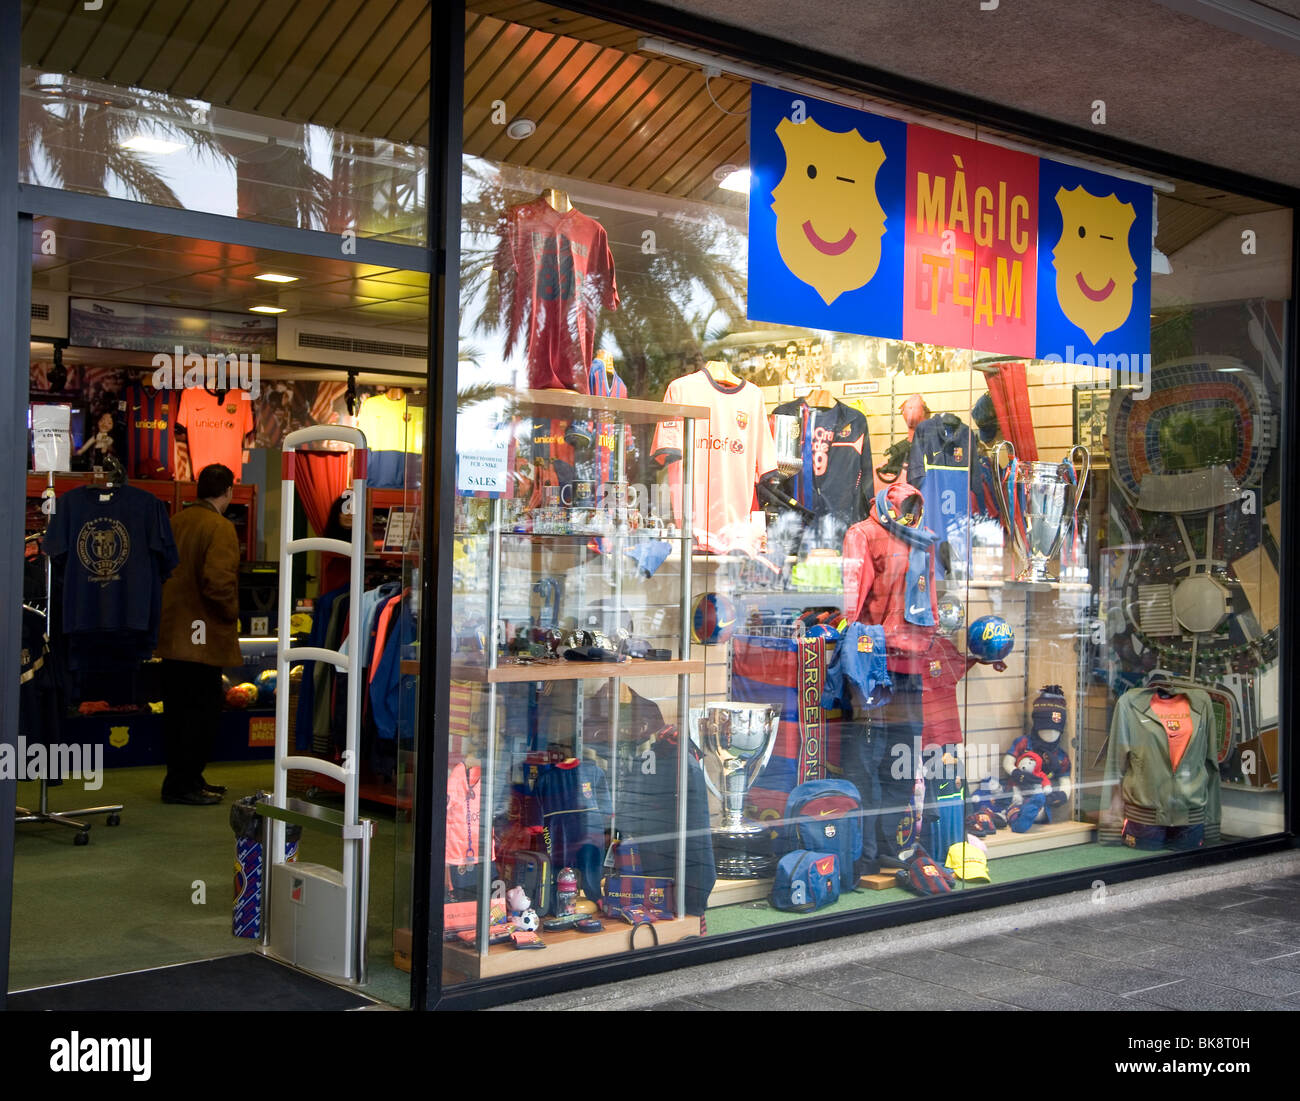 Barcelona football shop in the Olympic Village area Stock Photo - Alamy